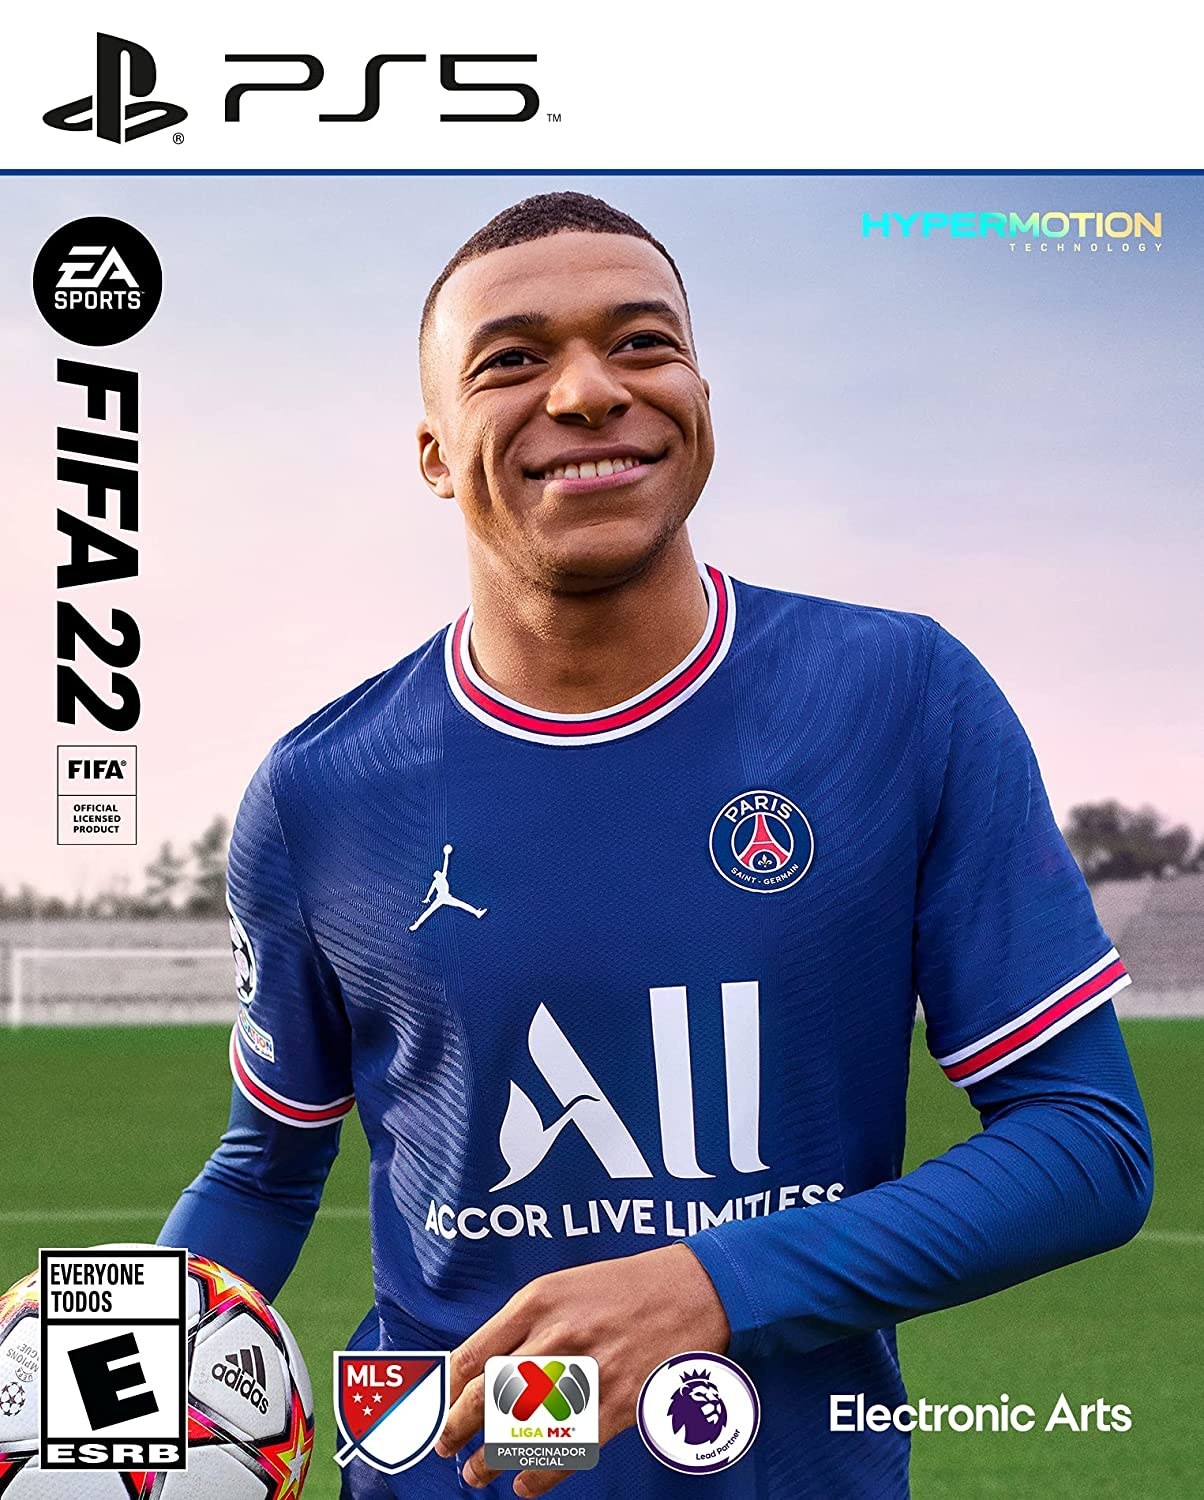 The cover of Fifa